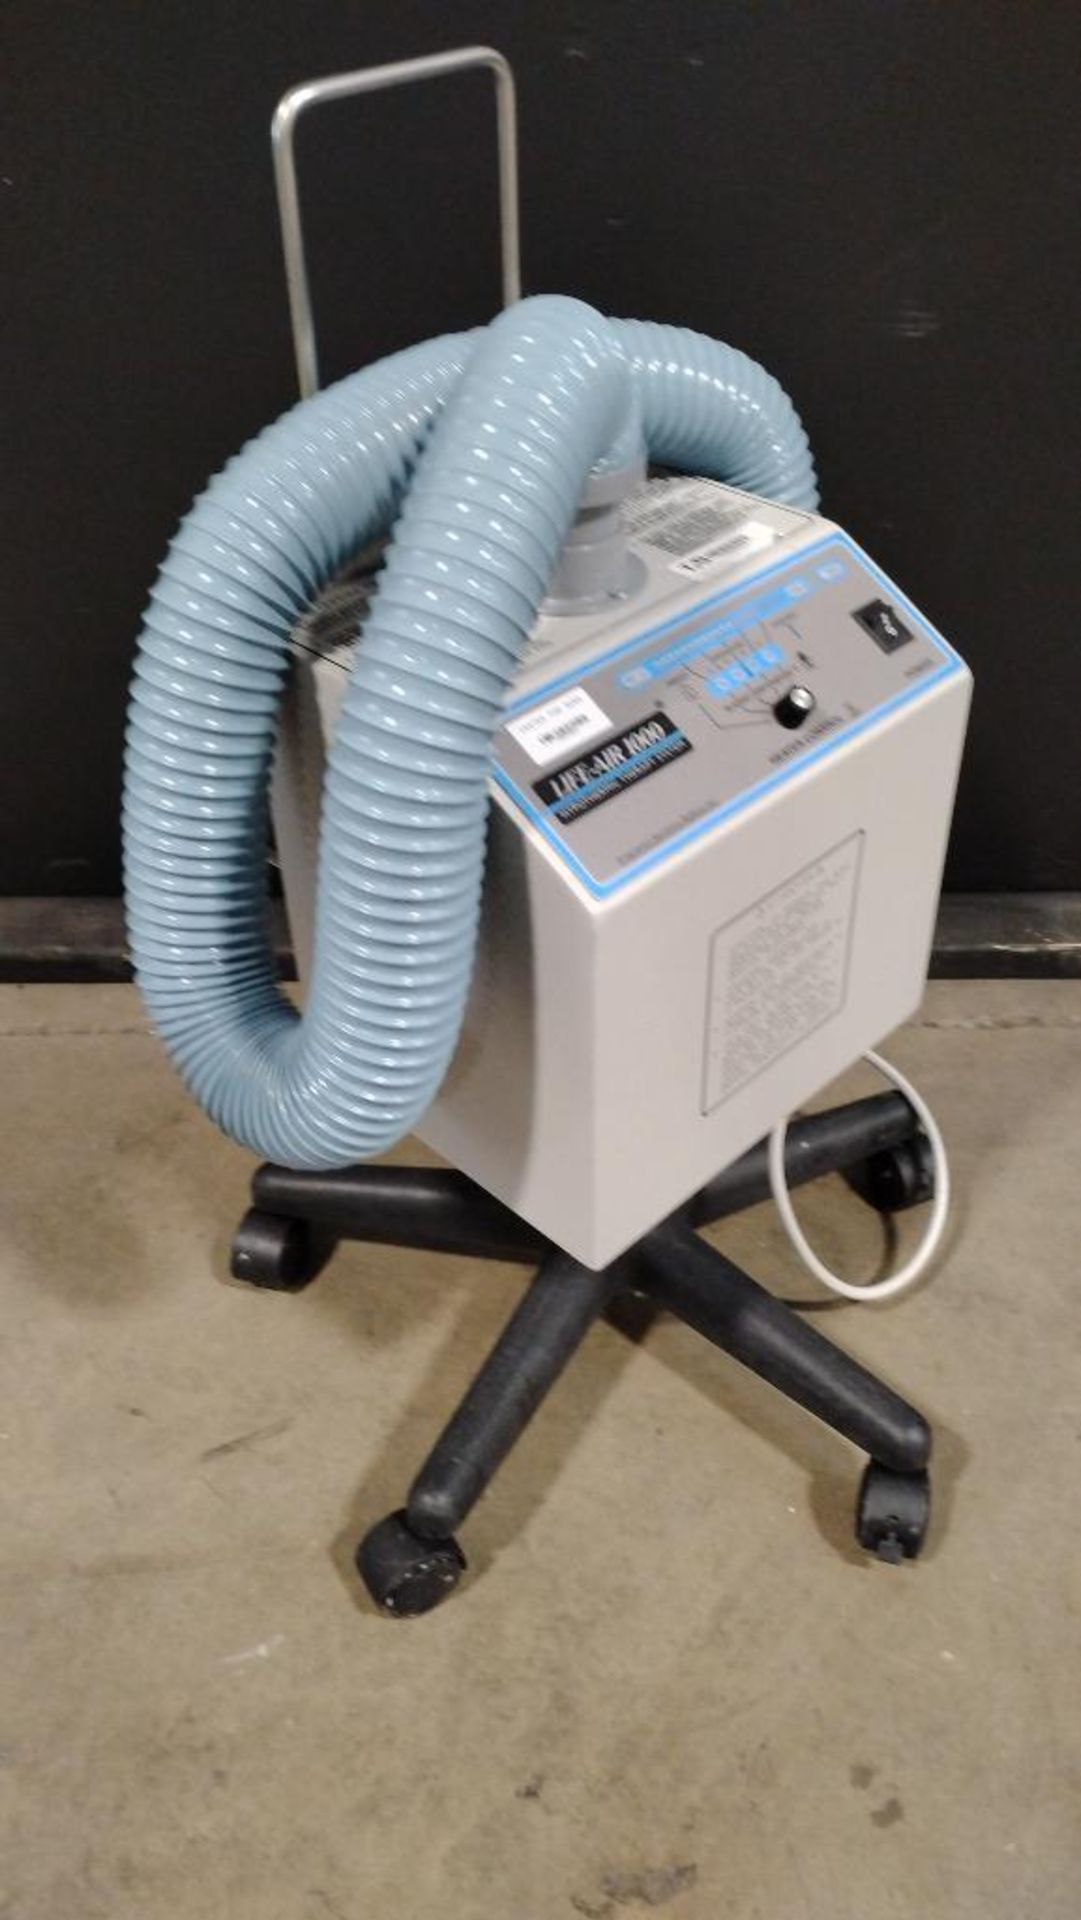 PROGRESSIVE DYNAMICS MEDICAL INC. LIFE-AIR 1000 HYPOTHERMICS THERAPY SYSTEM - Image 3 of 4